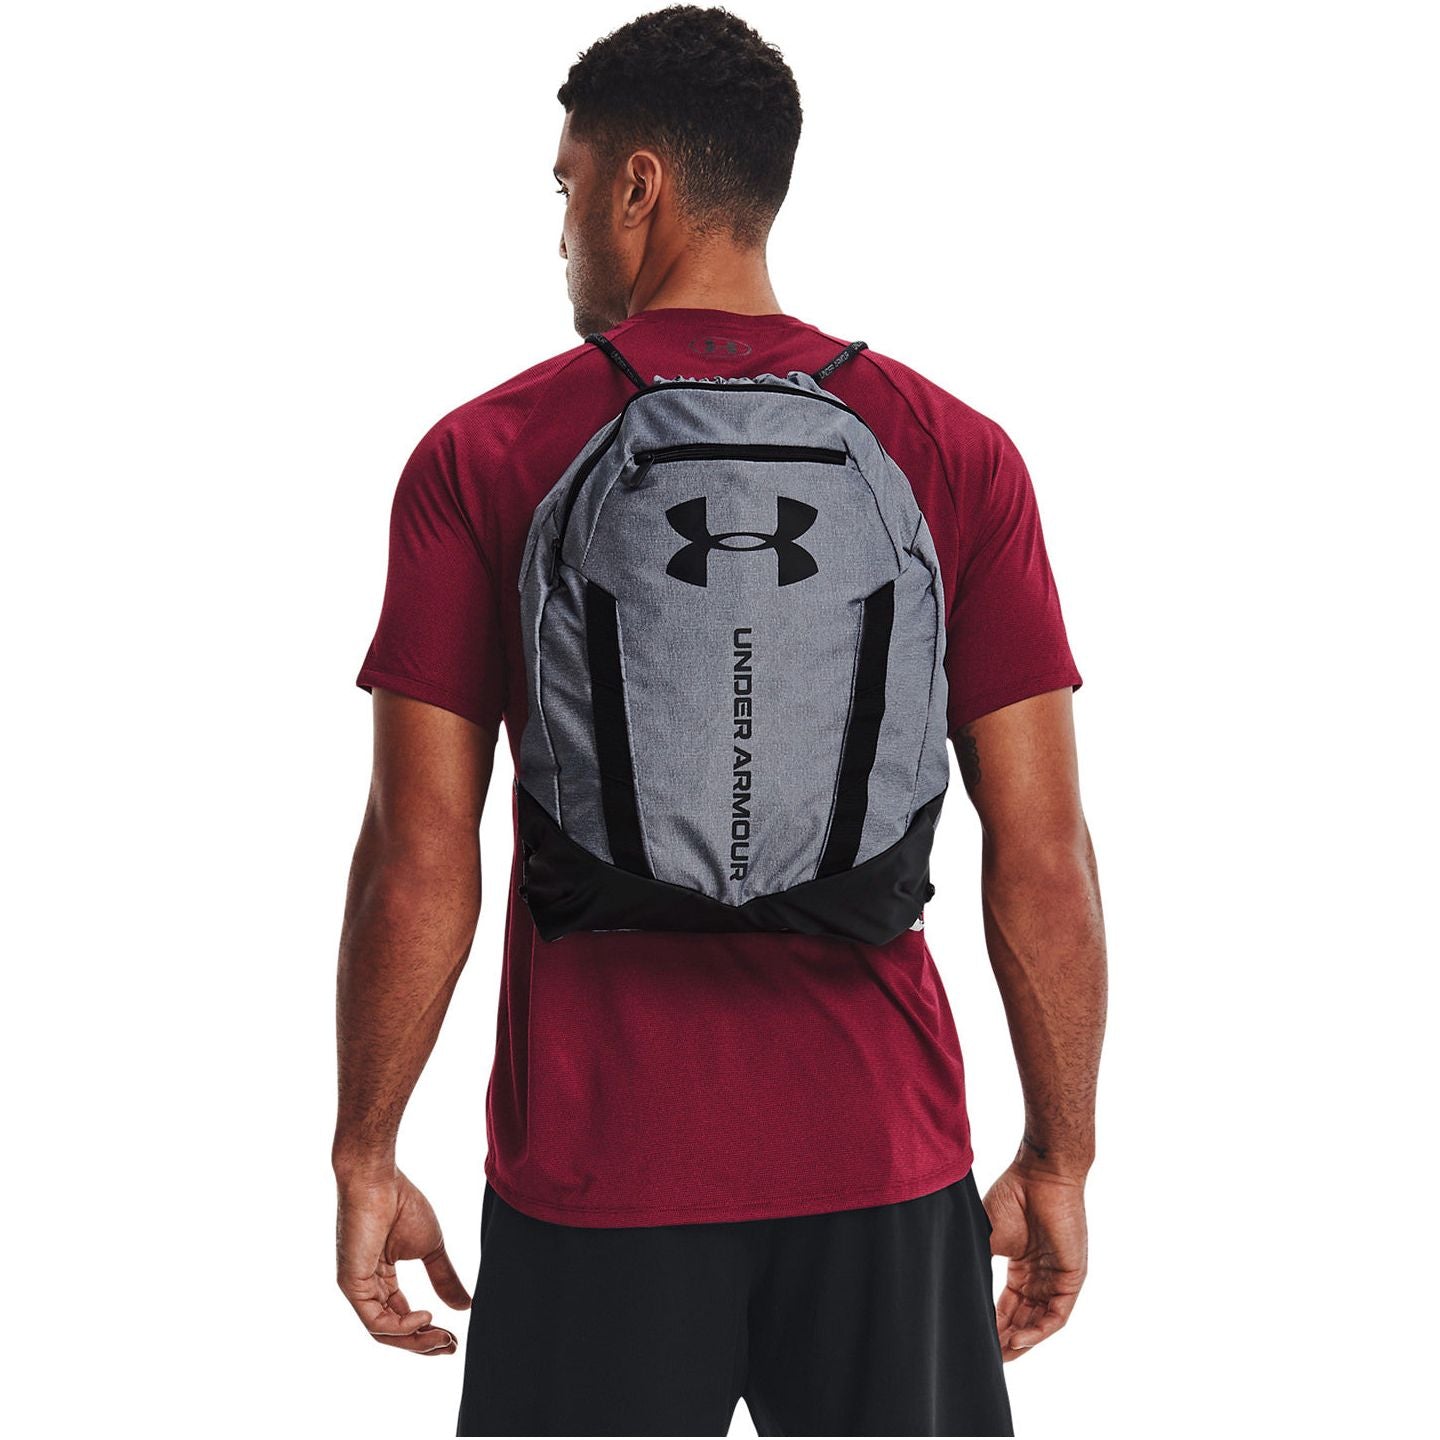 Under Armour Undeniable Sackpack